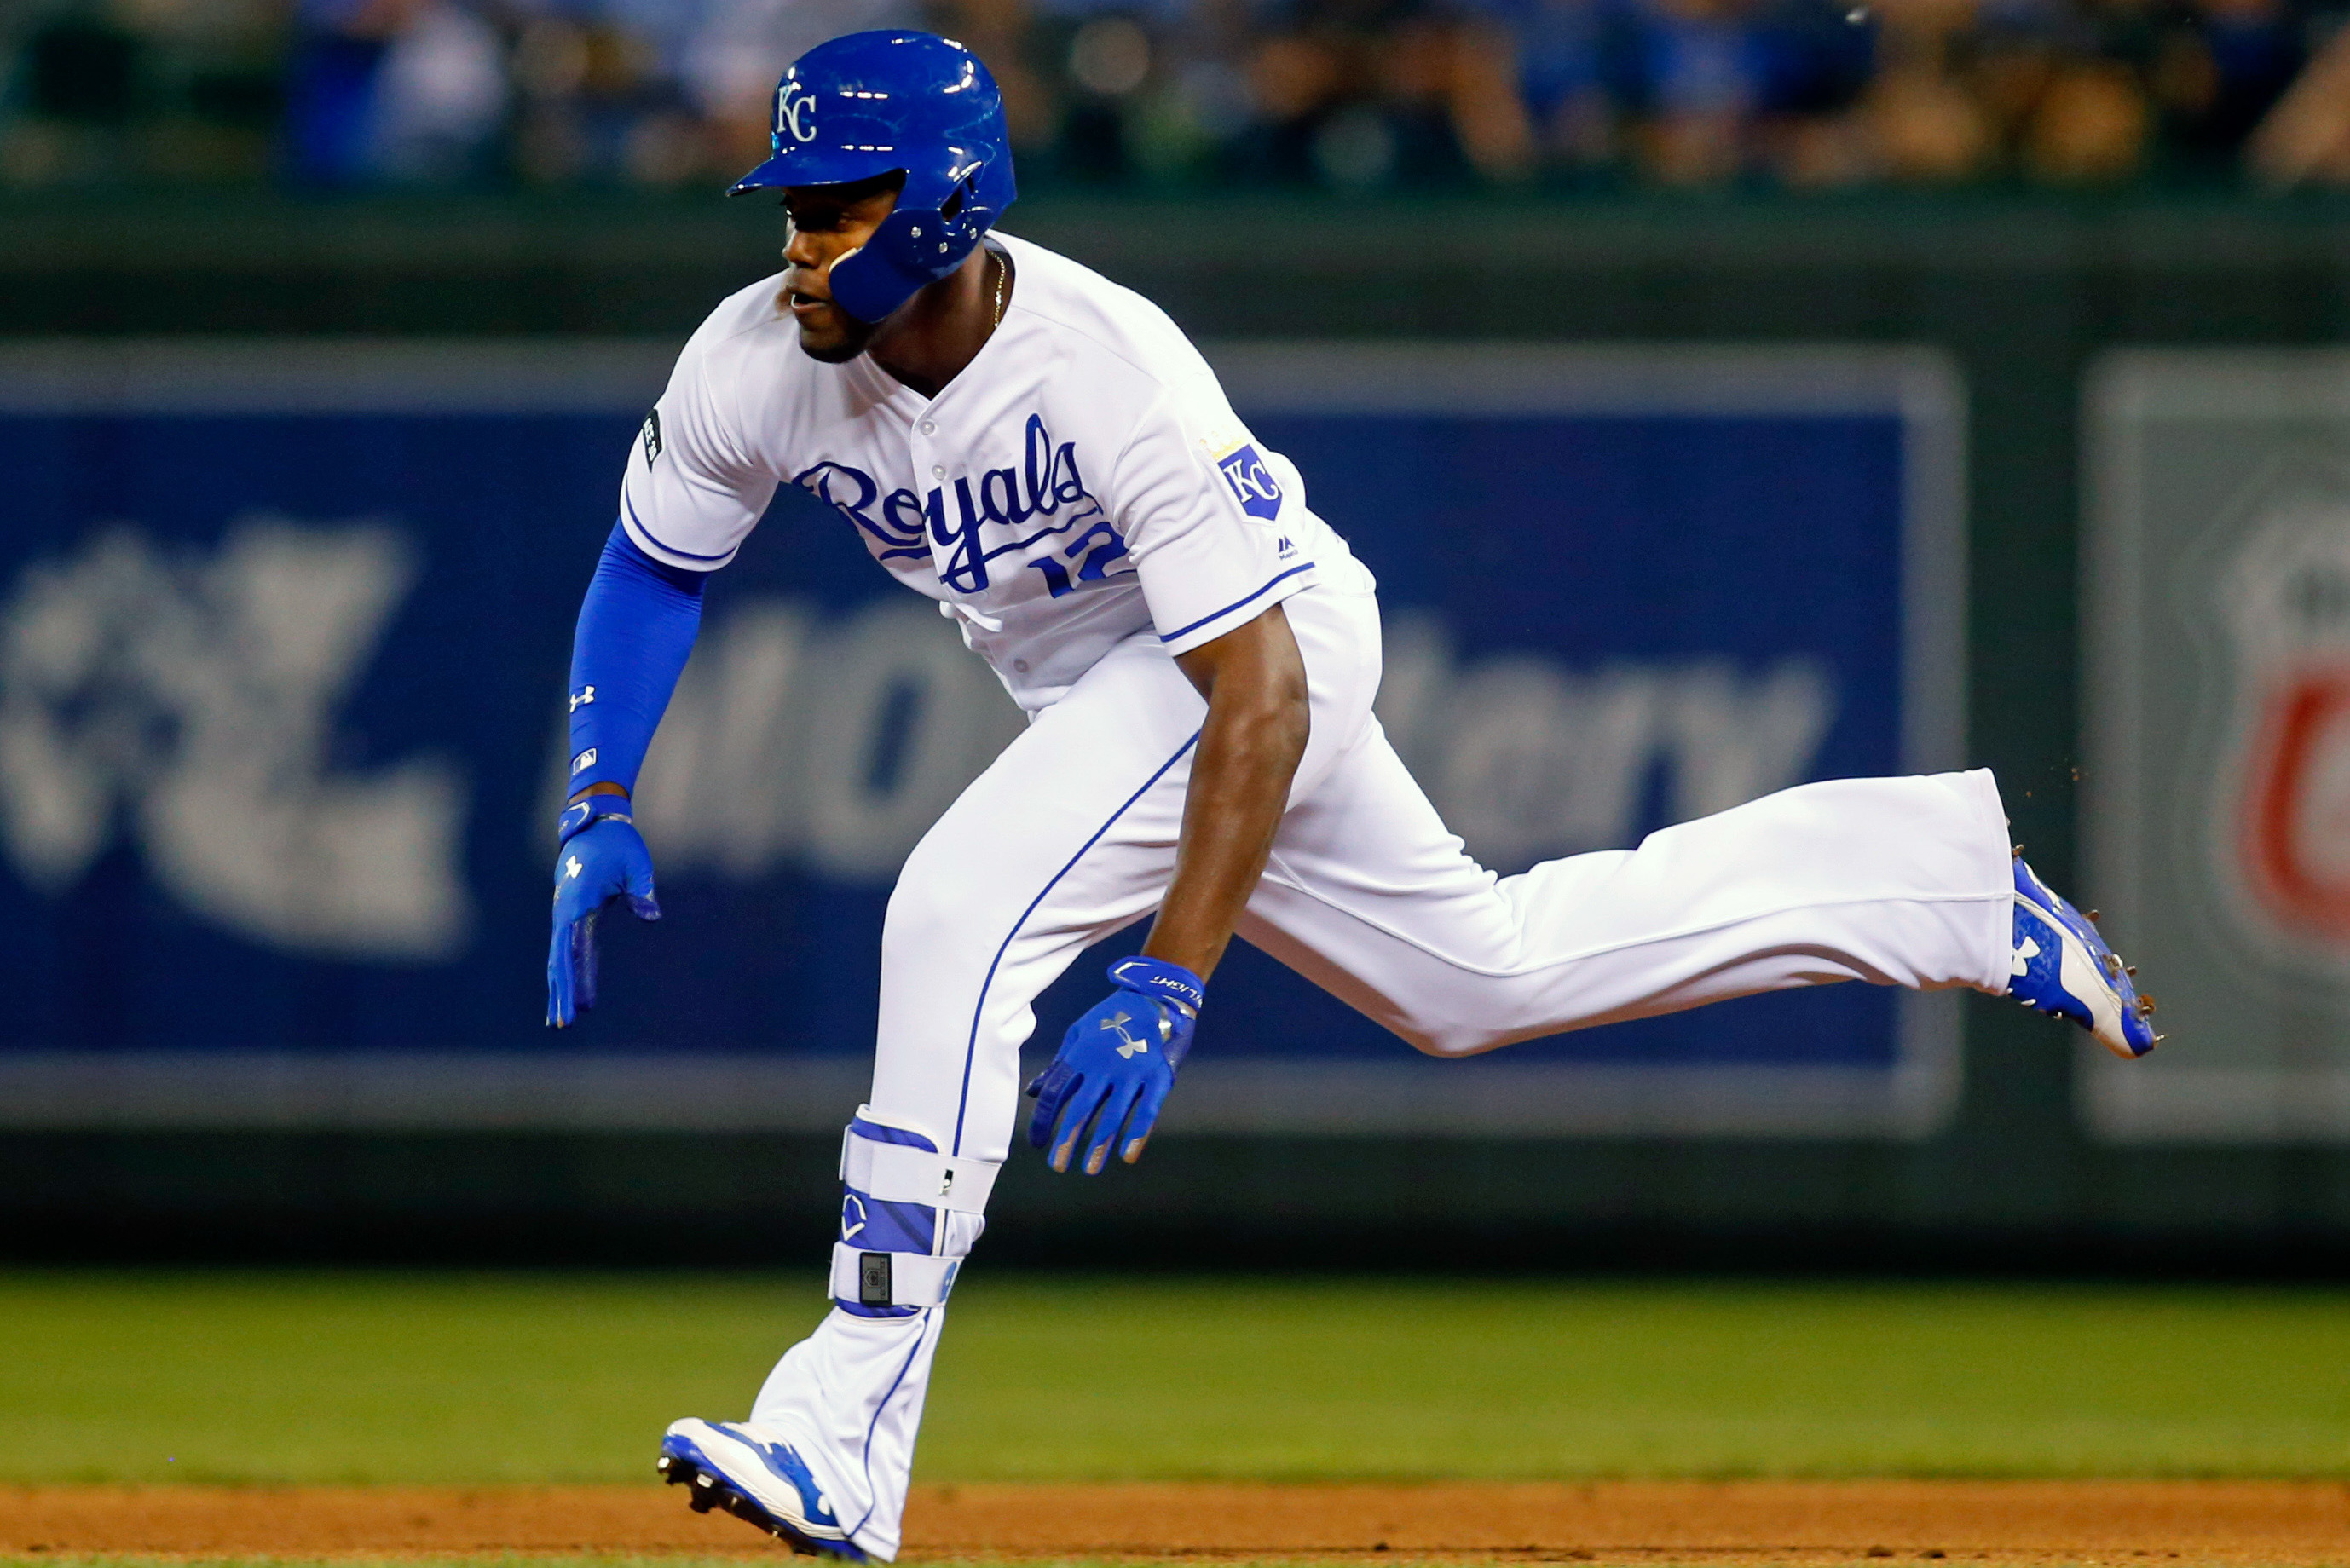 Jorge Soler posts special message about Royals after trade